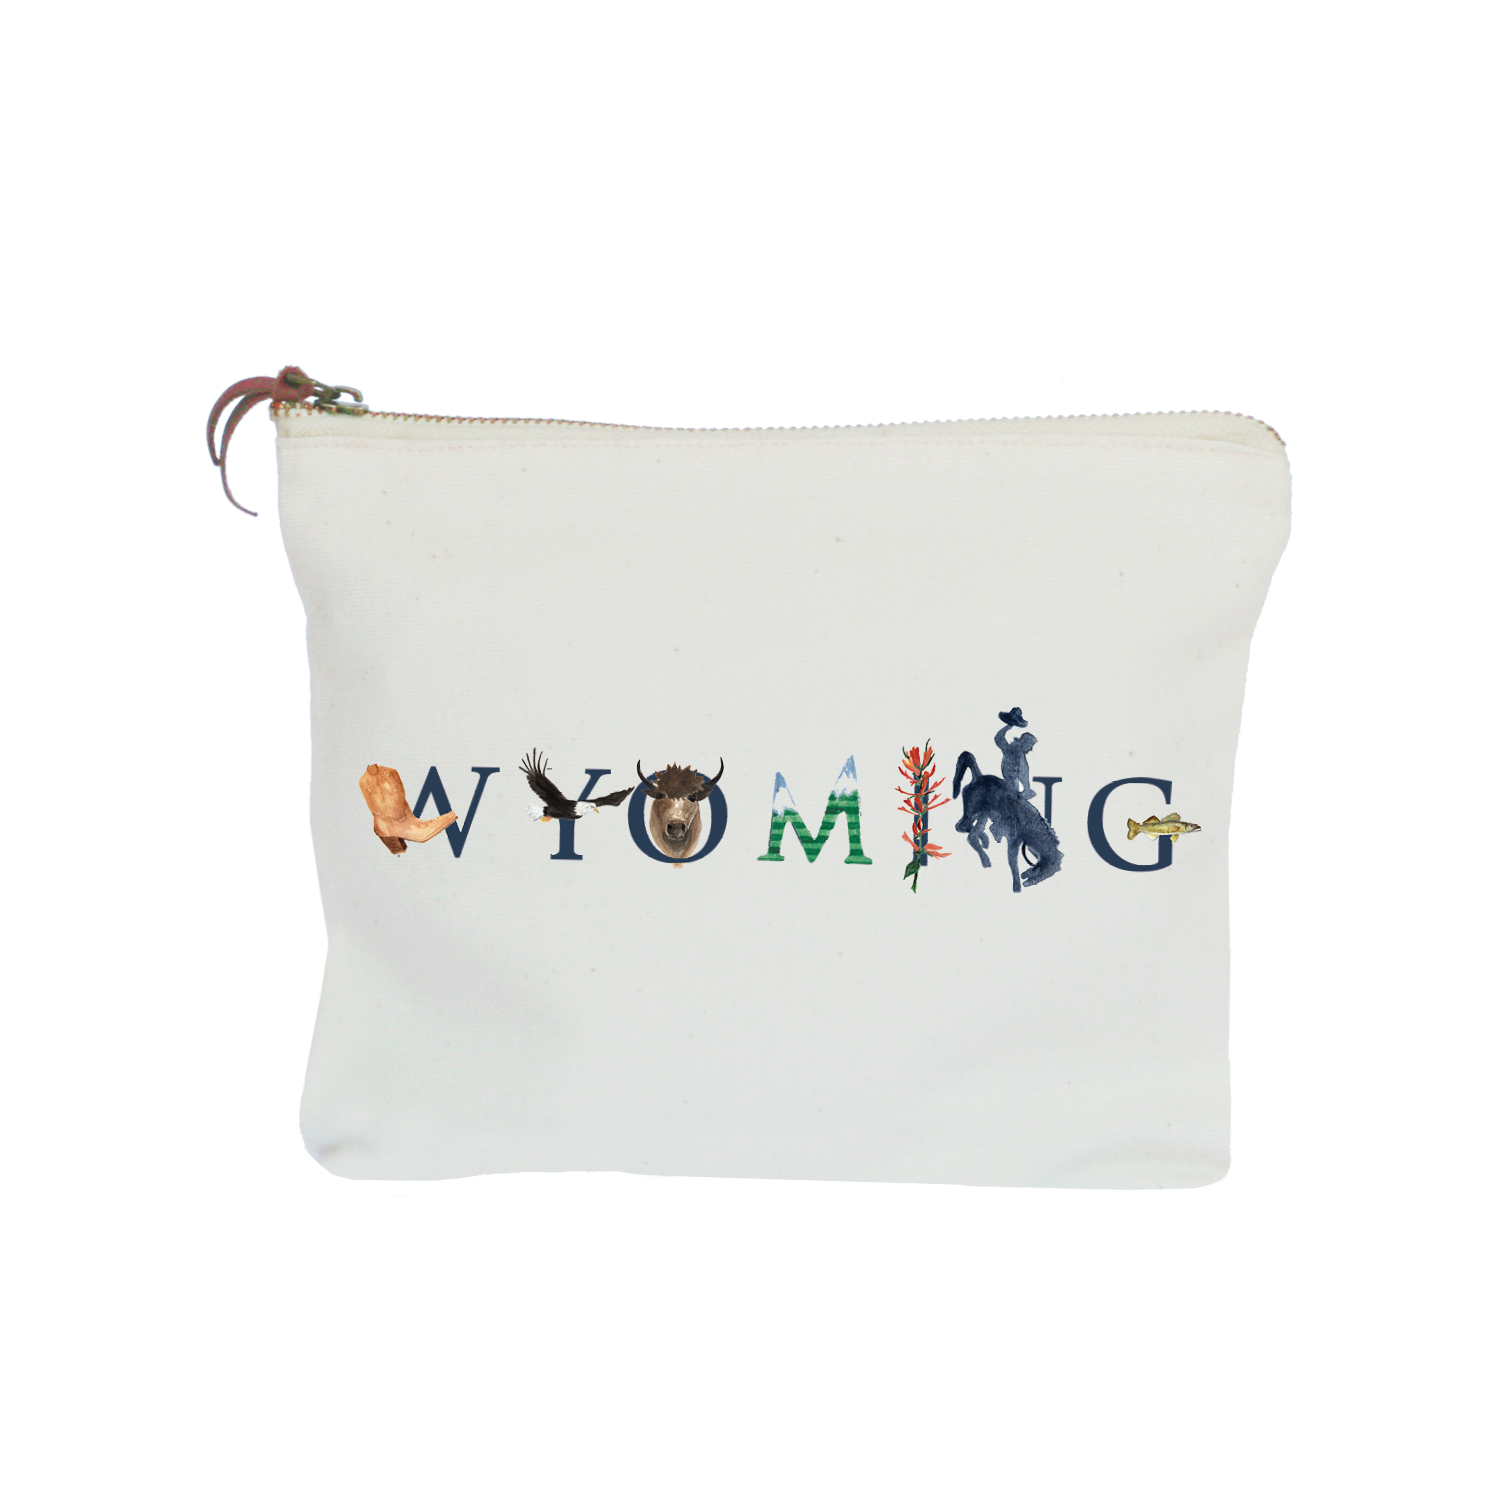 Wyoming zipper pouch